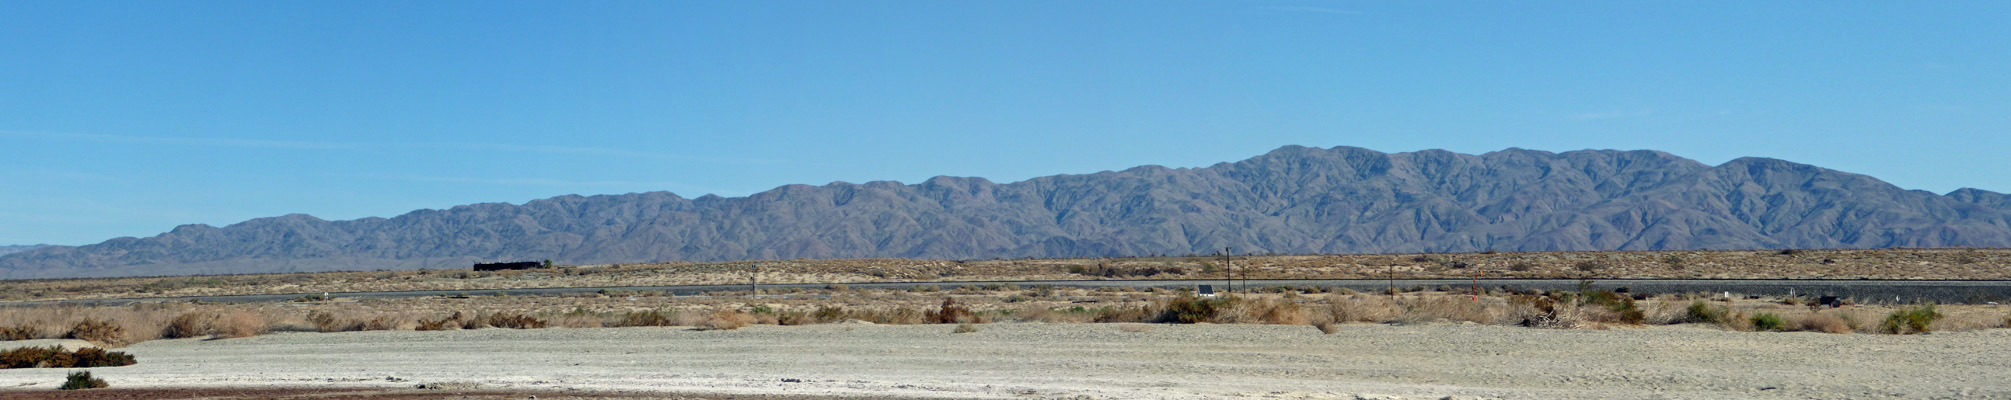 Looking east from Salton Sea